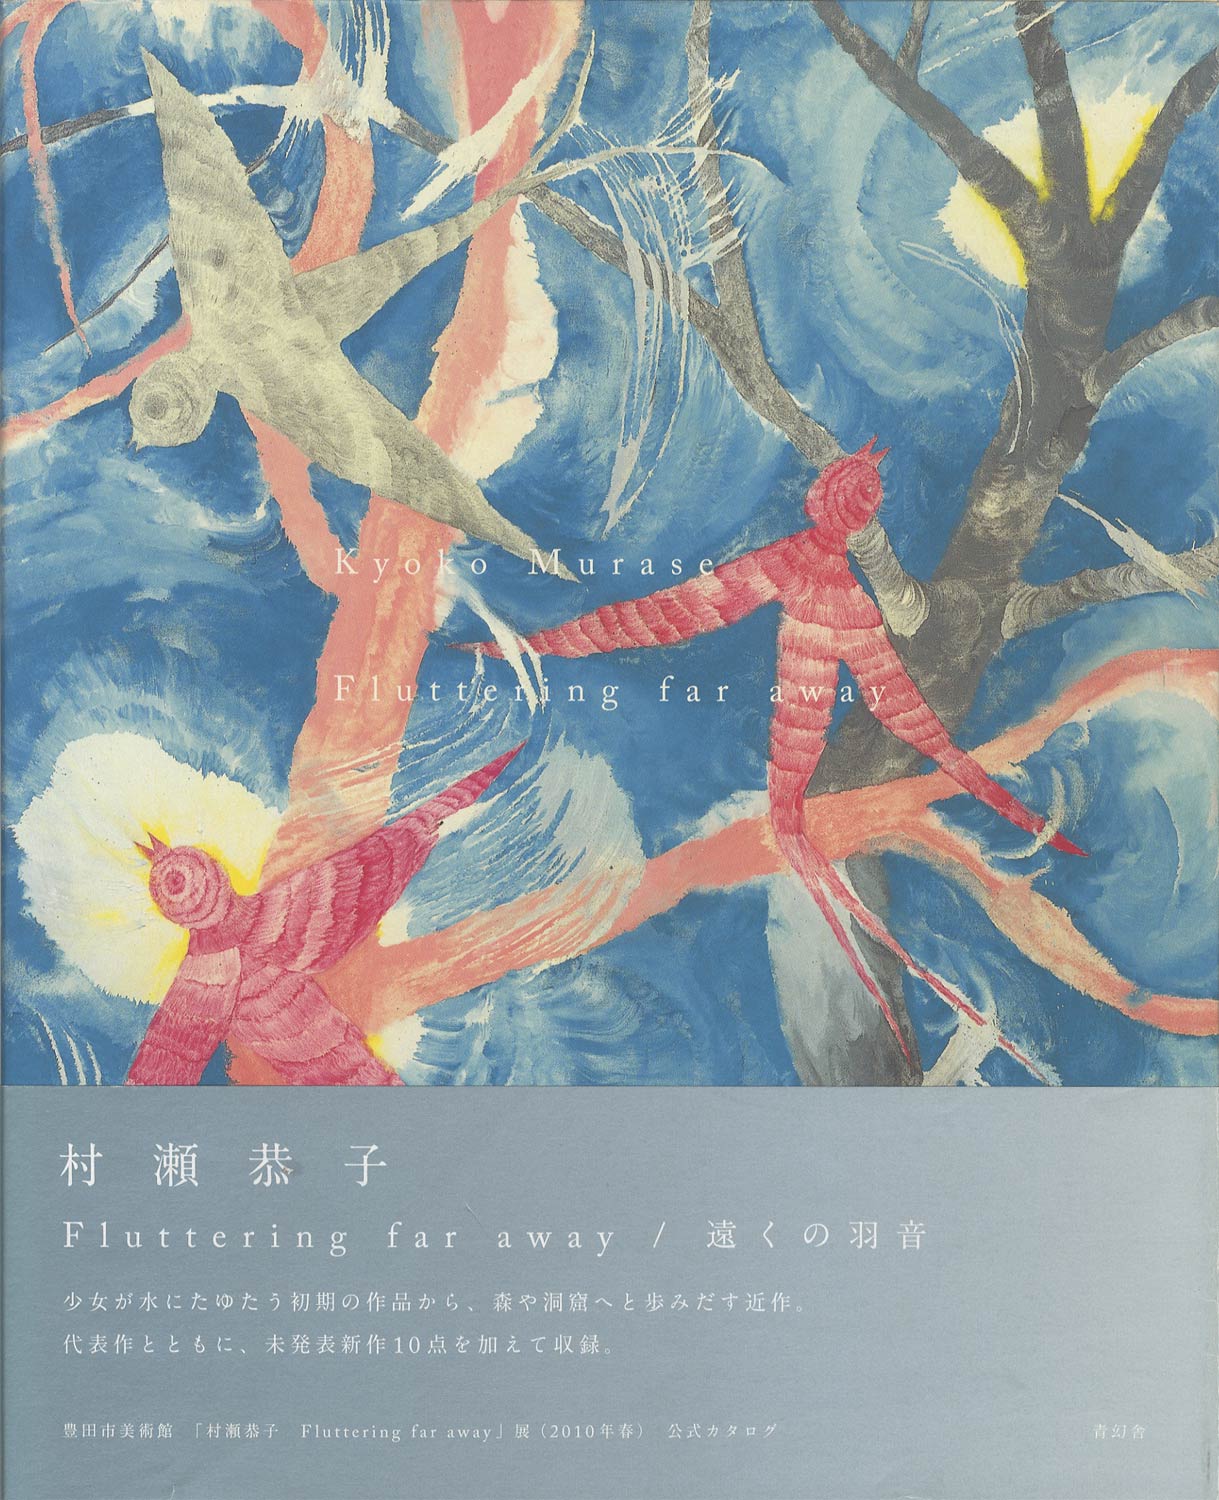 Fluttering far away / 遠くの羽音［image1］